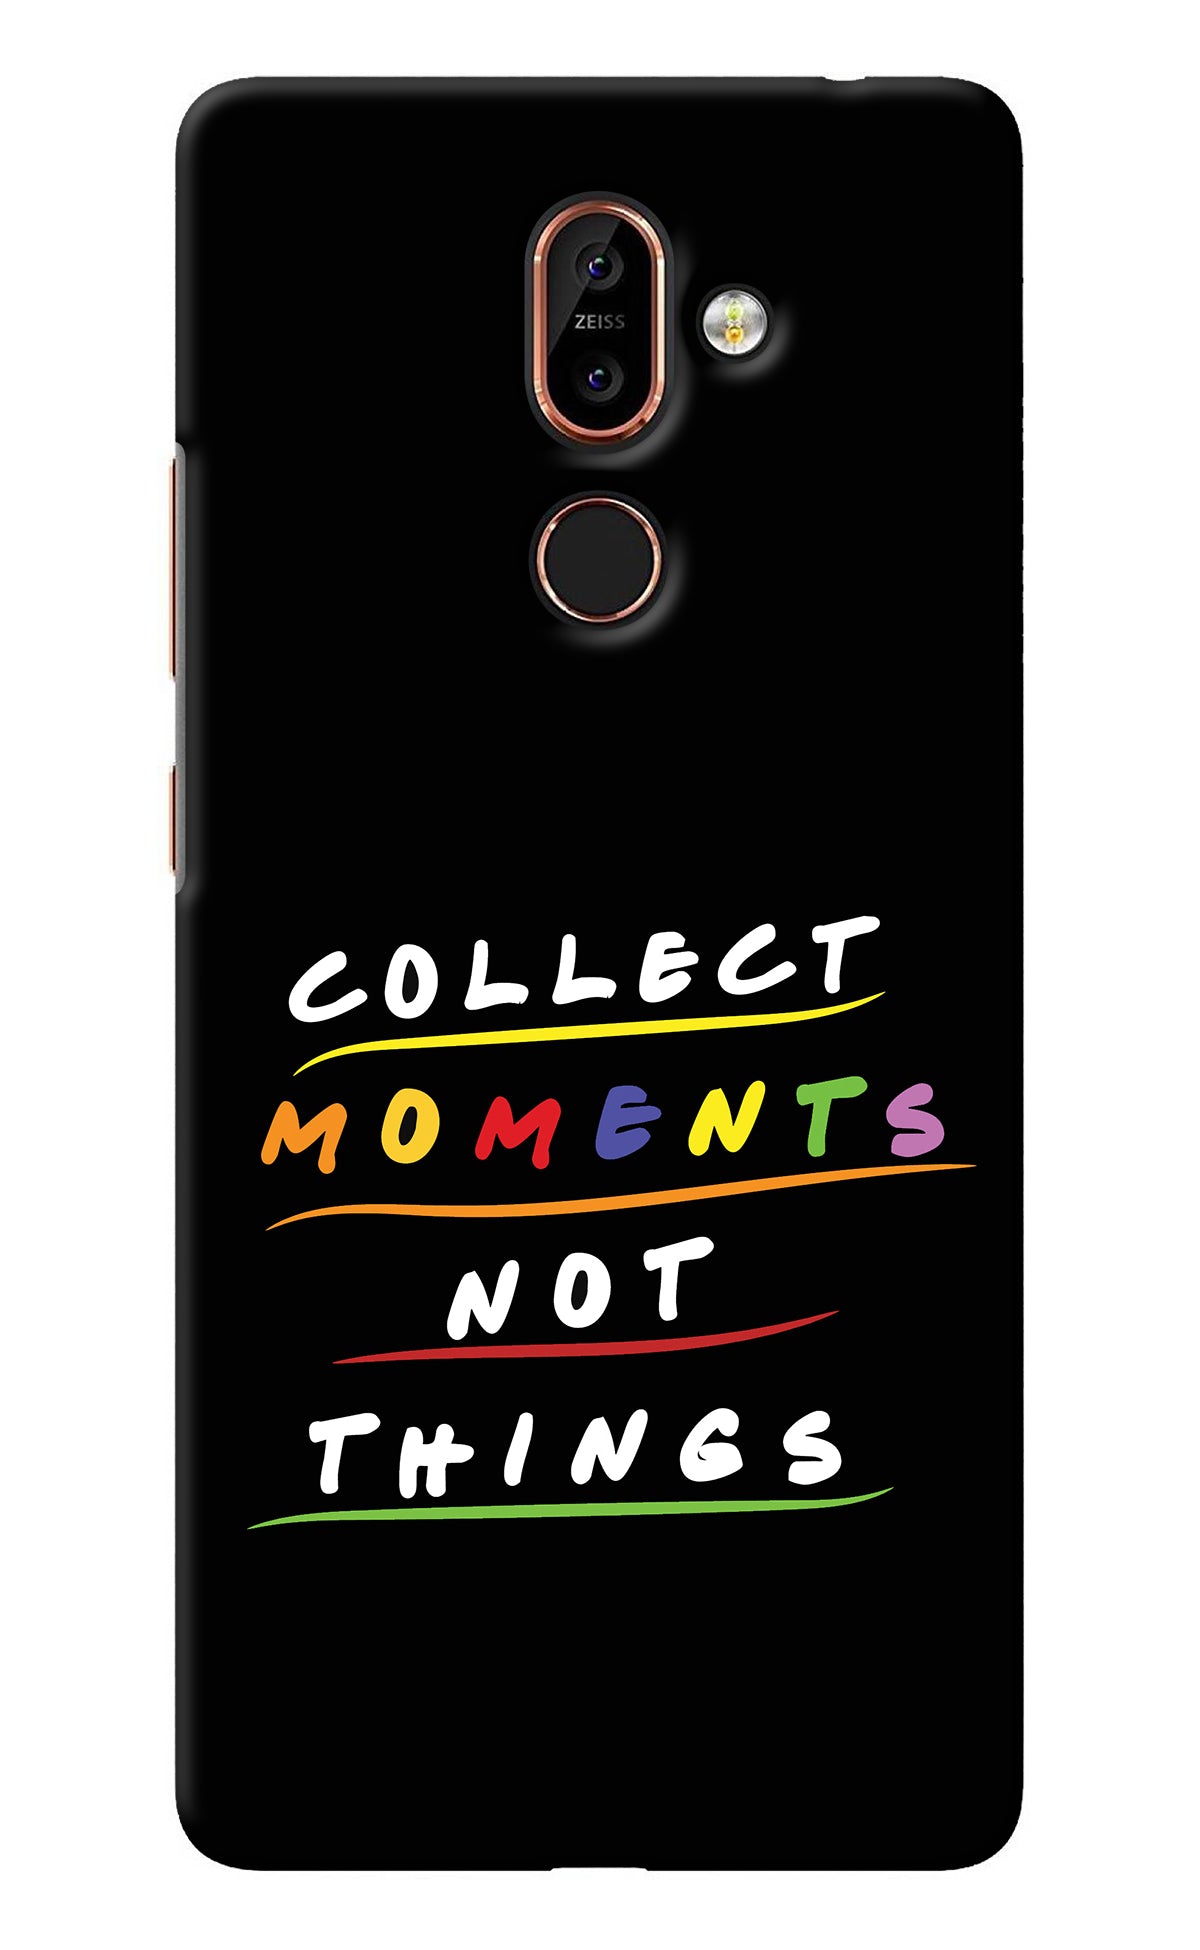 Collect Moments Not Things Nokia 7 Plus Back Cover